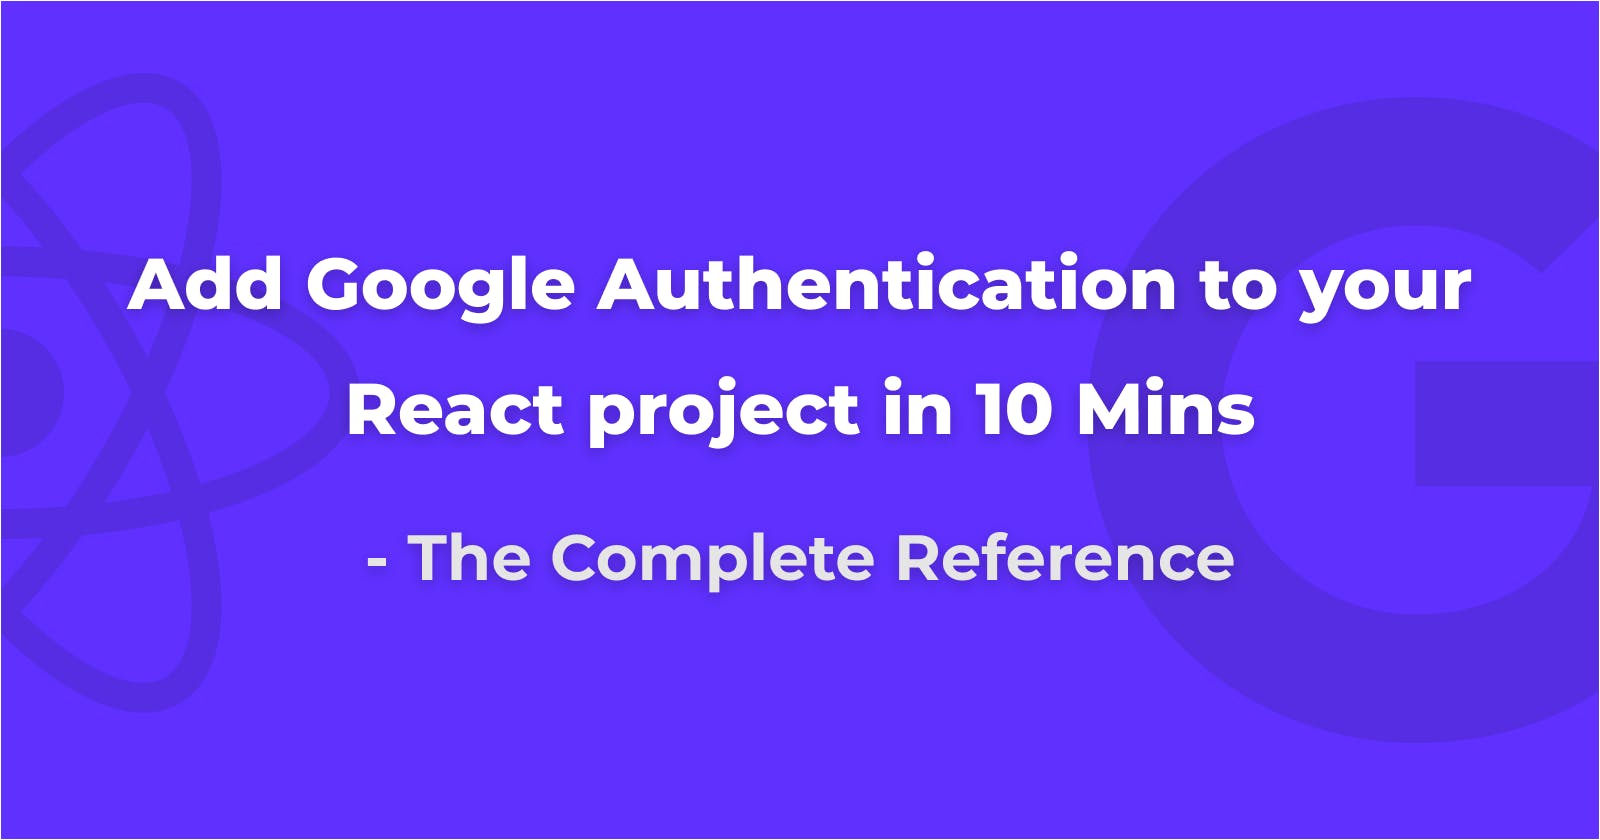 Add Google Login to your React Apps in 10 mins